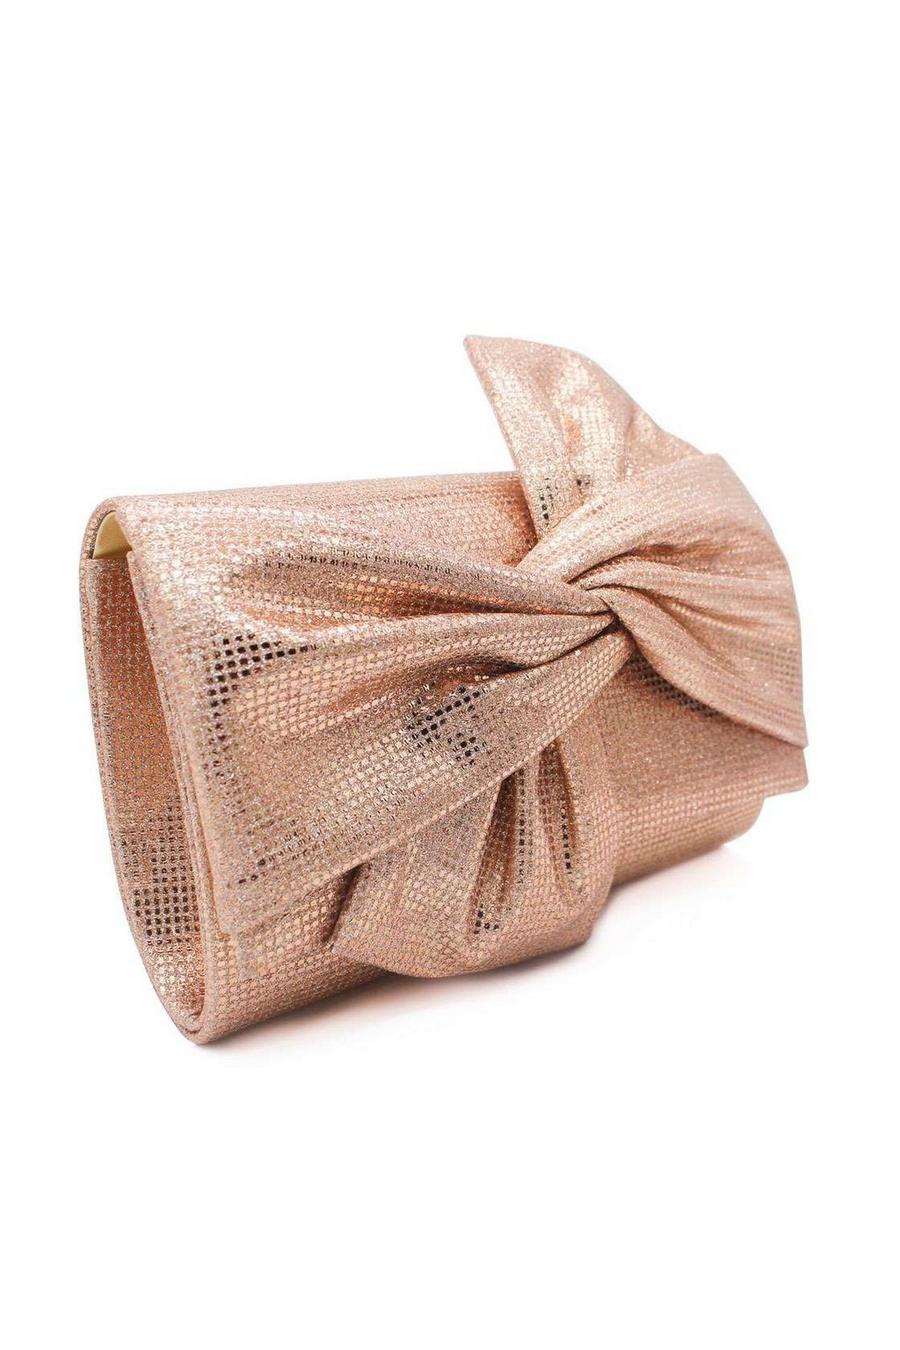 Gold Large Bow Shiny Evening Clutch Bag With Chain Strap